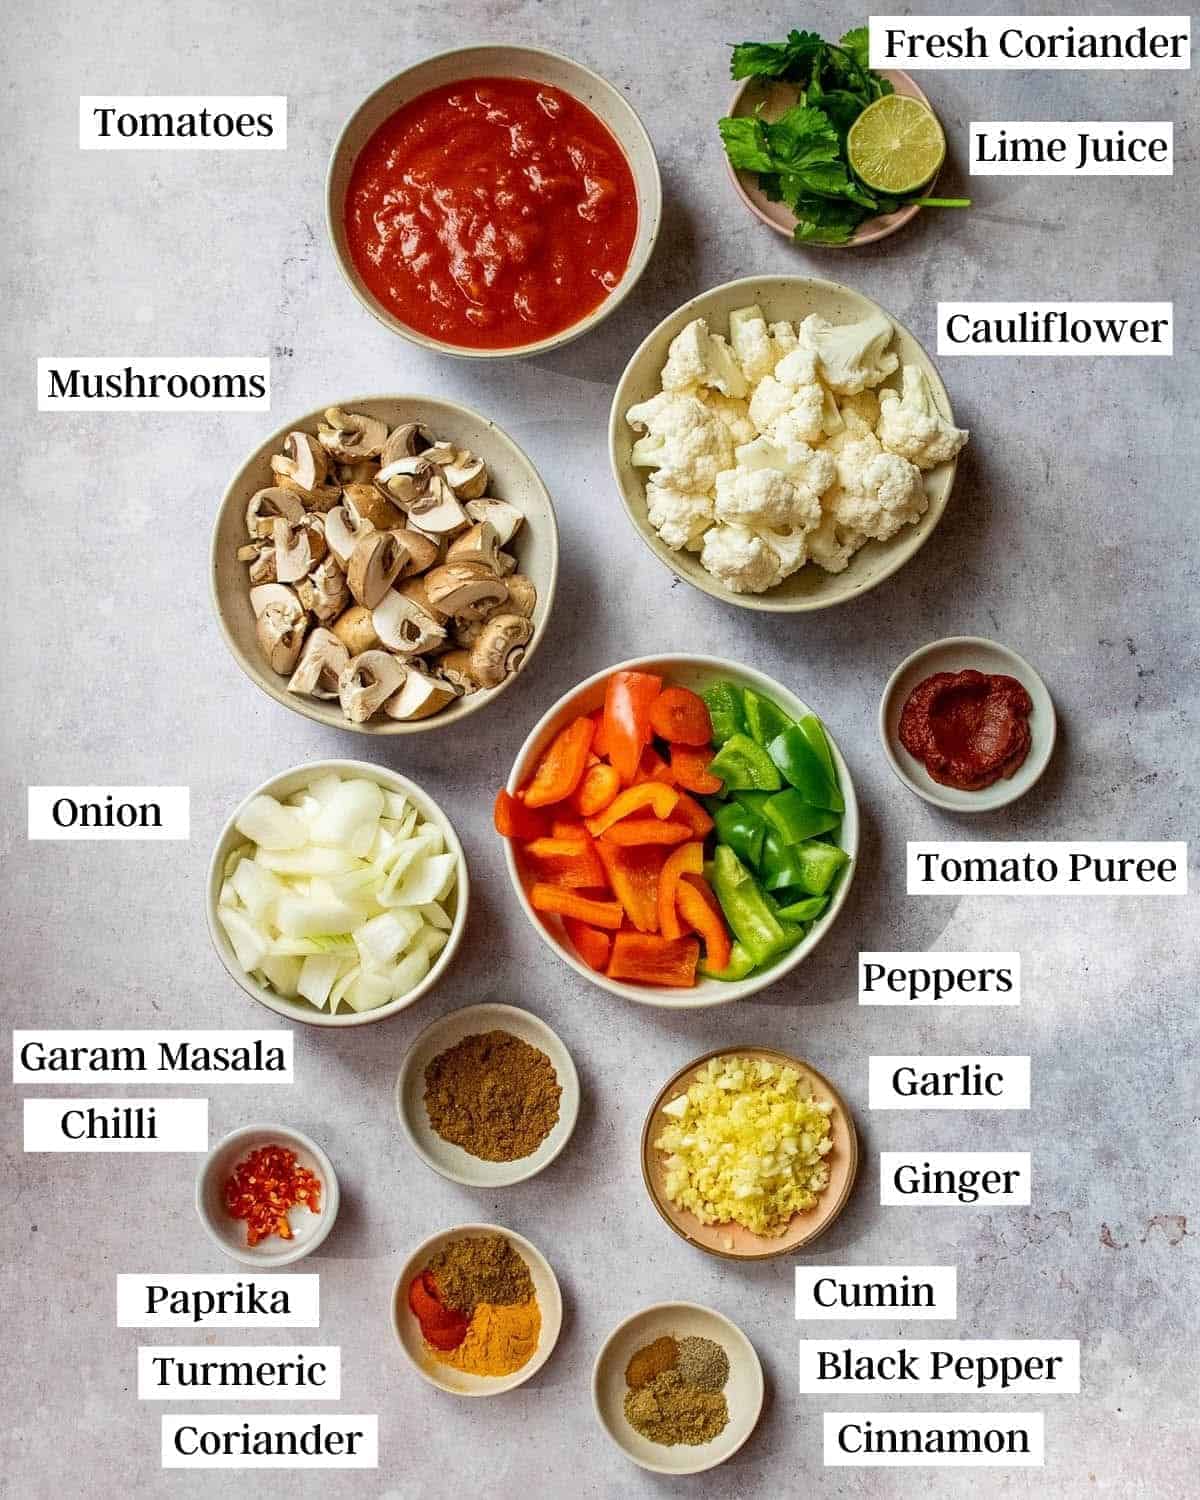 Chopped ingredients and spices in separate bowls on a table